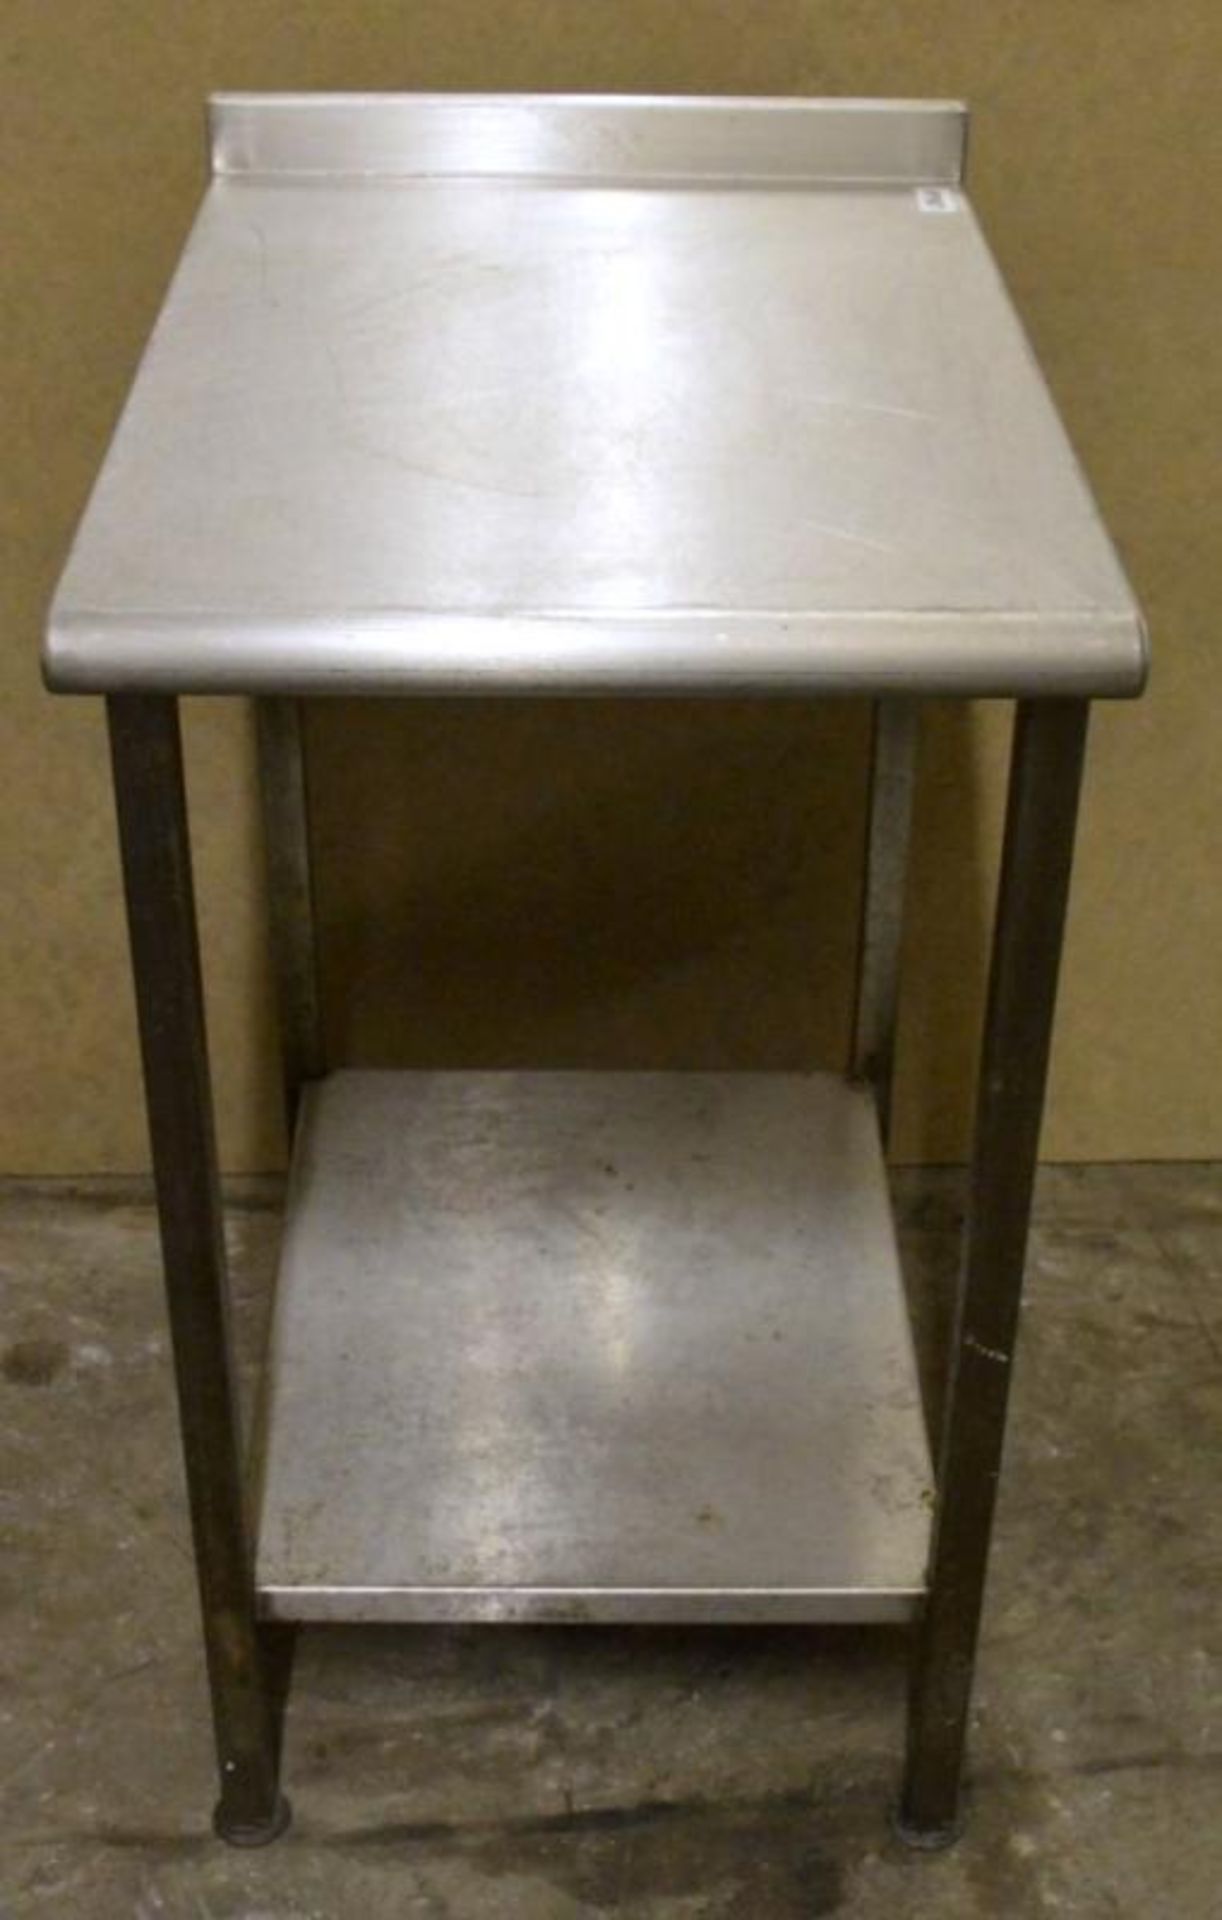 1 x Stainless Steel Prep Table With Undershelf and Backsplash - H86 x W50 x D70 cms - CL282 - Ref JP - Image 2 of 3